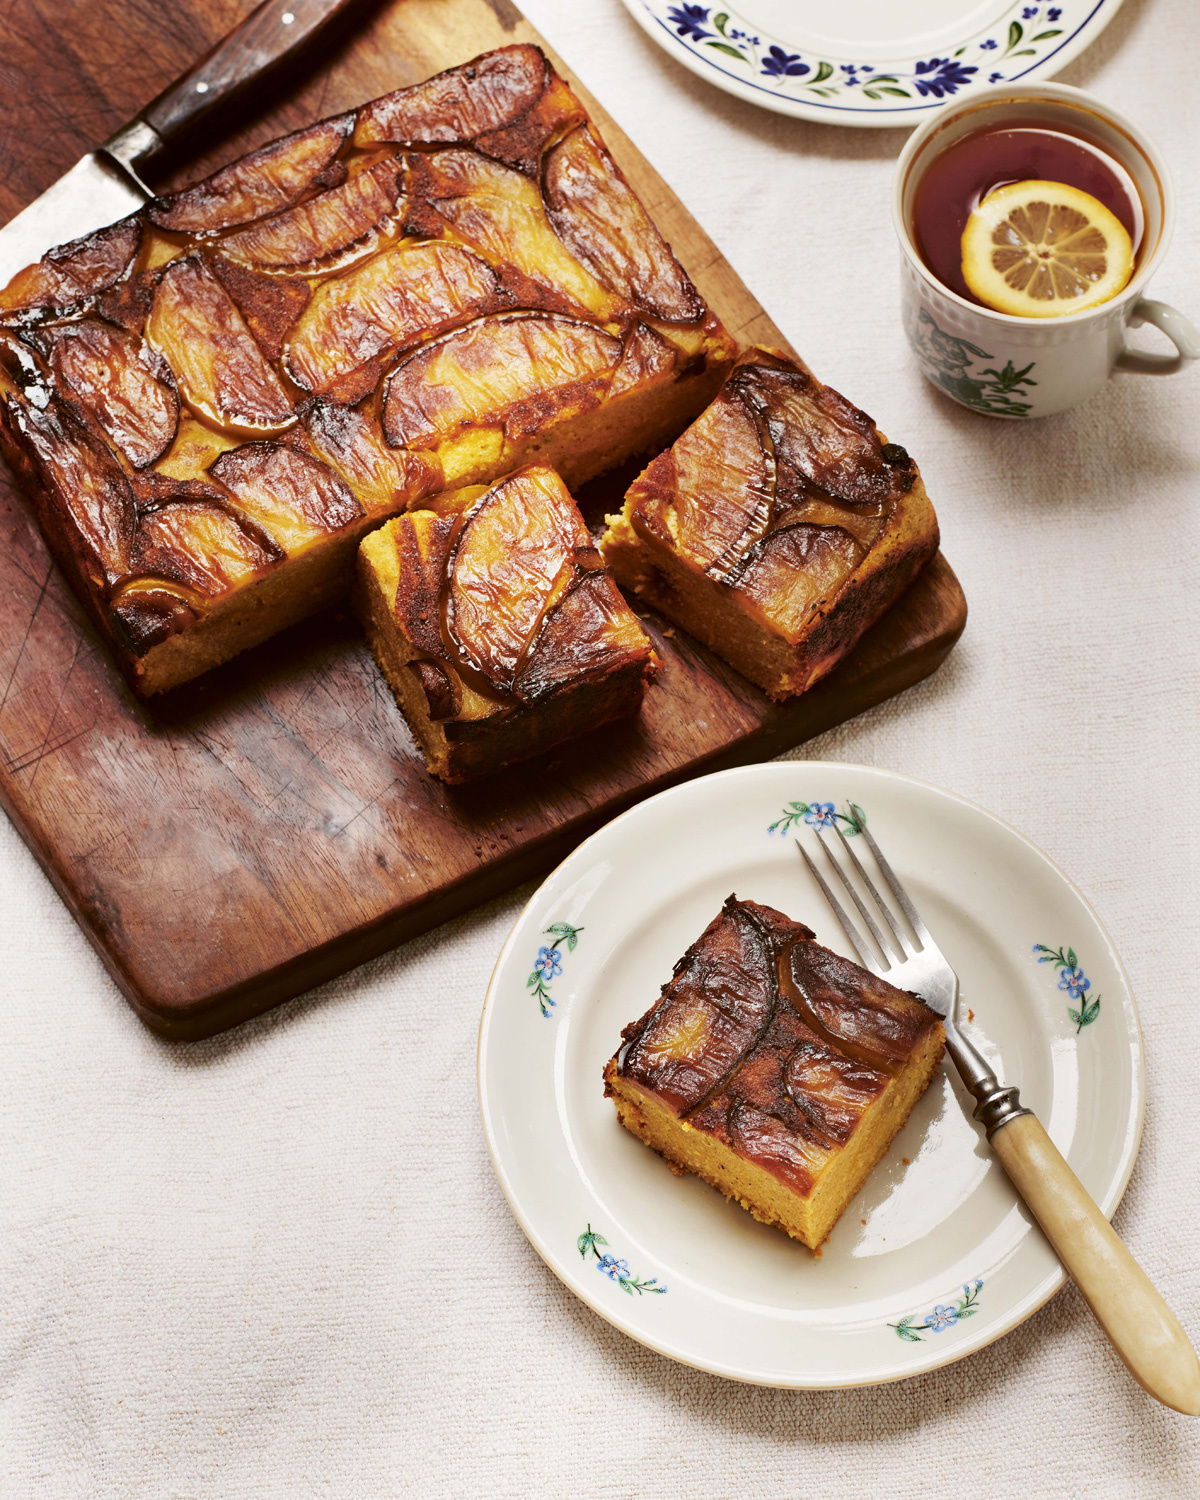 Image of Olia Hercules' Curd Cake with Caramelised Apples